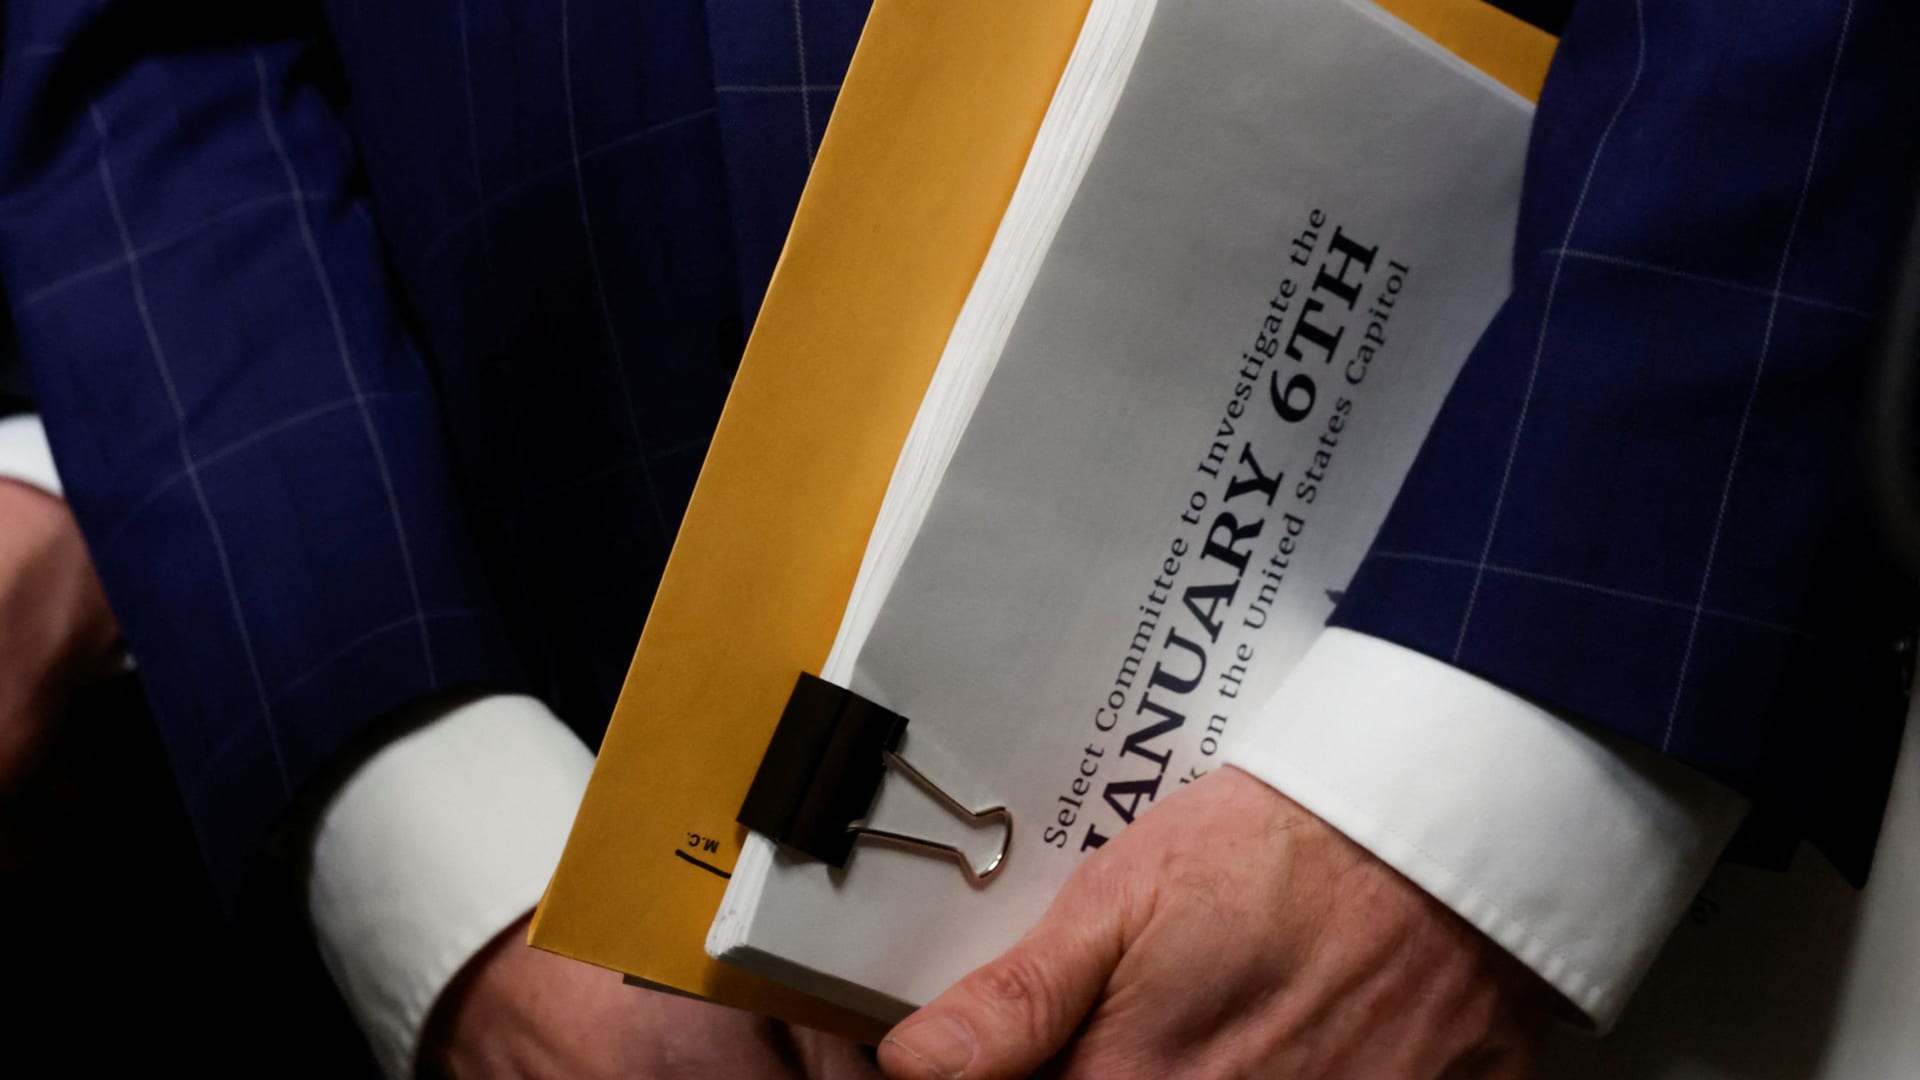 U.S. Rep. Jamie Raskin (D-MD) carries the comittee's final report as he departs after the final public meeting of the U.S. House Select Committee investigating the January 6 Attack on the U.S. Capitol, on Capitol Hill in Washington, U.S., December 19, 2022. 